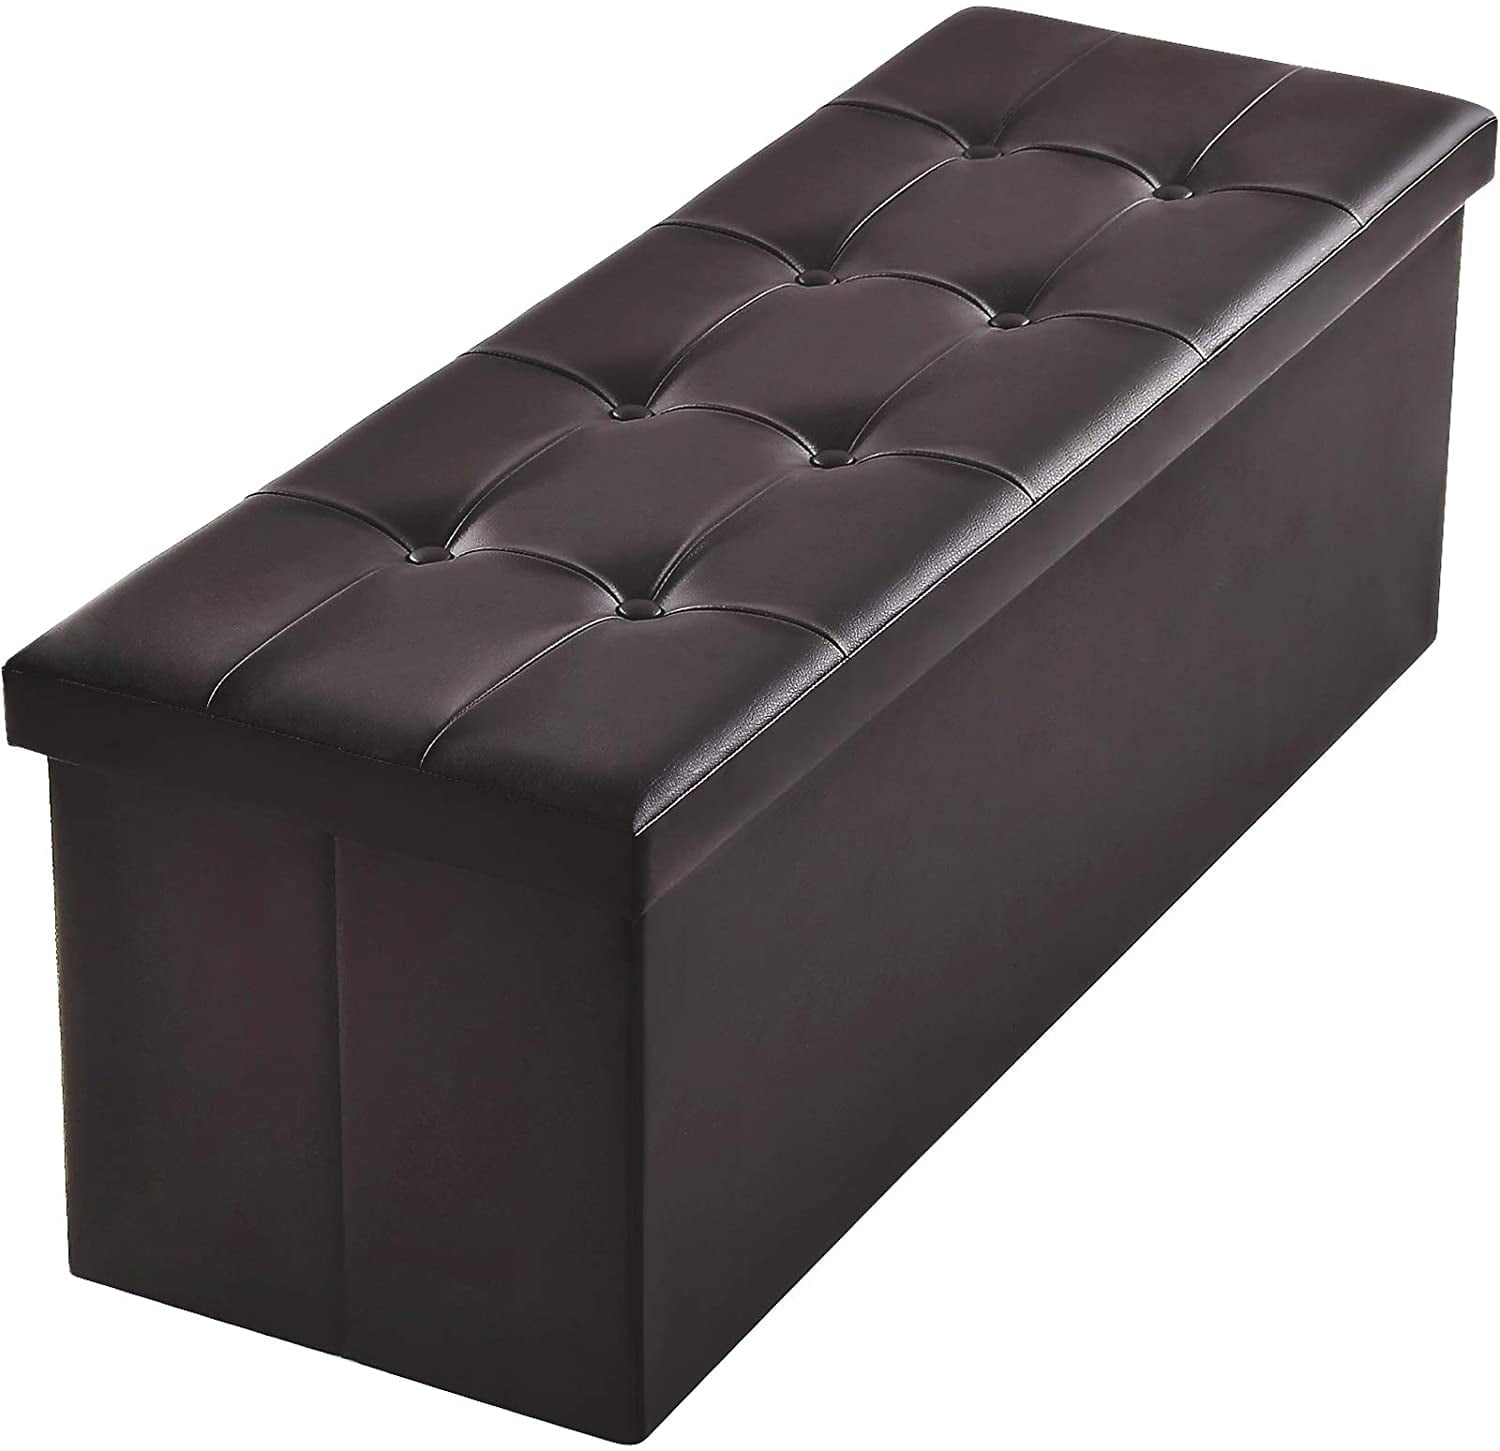 Camabel Folding Ottoman Storage Bench Cube 43 inch Hold up 700lbs Faux ...